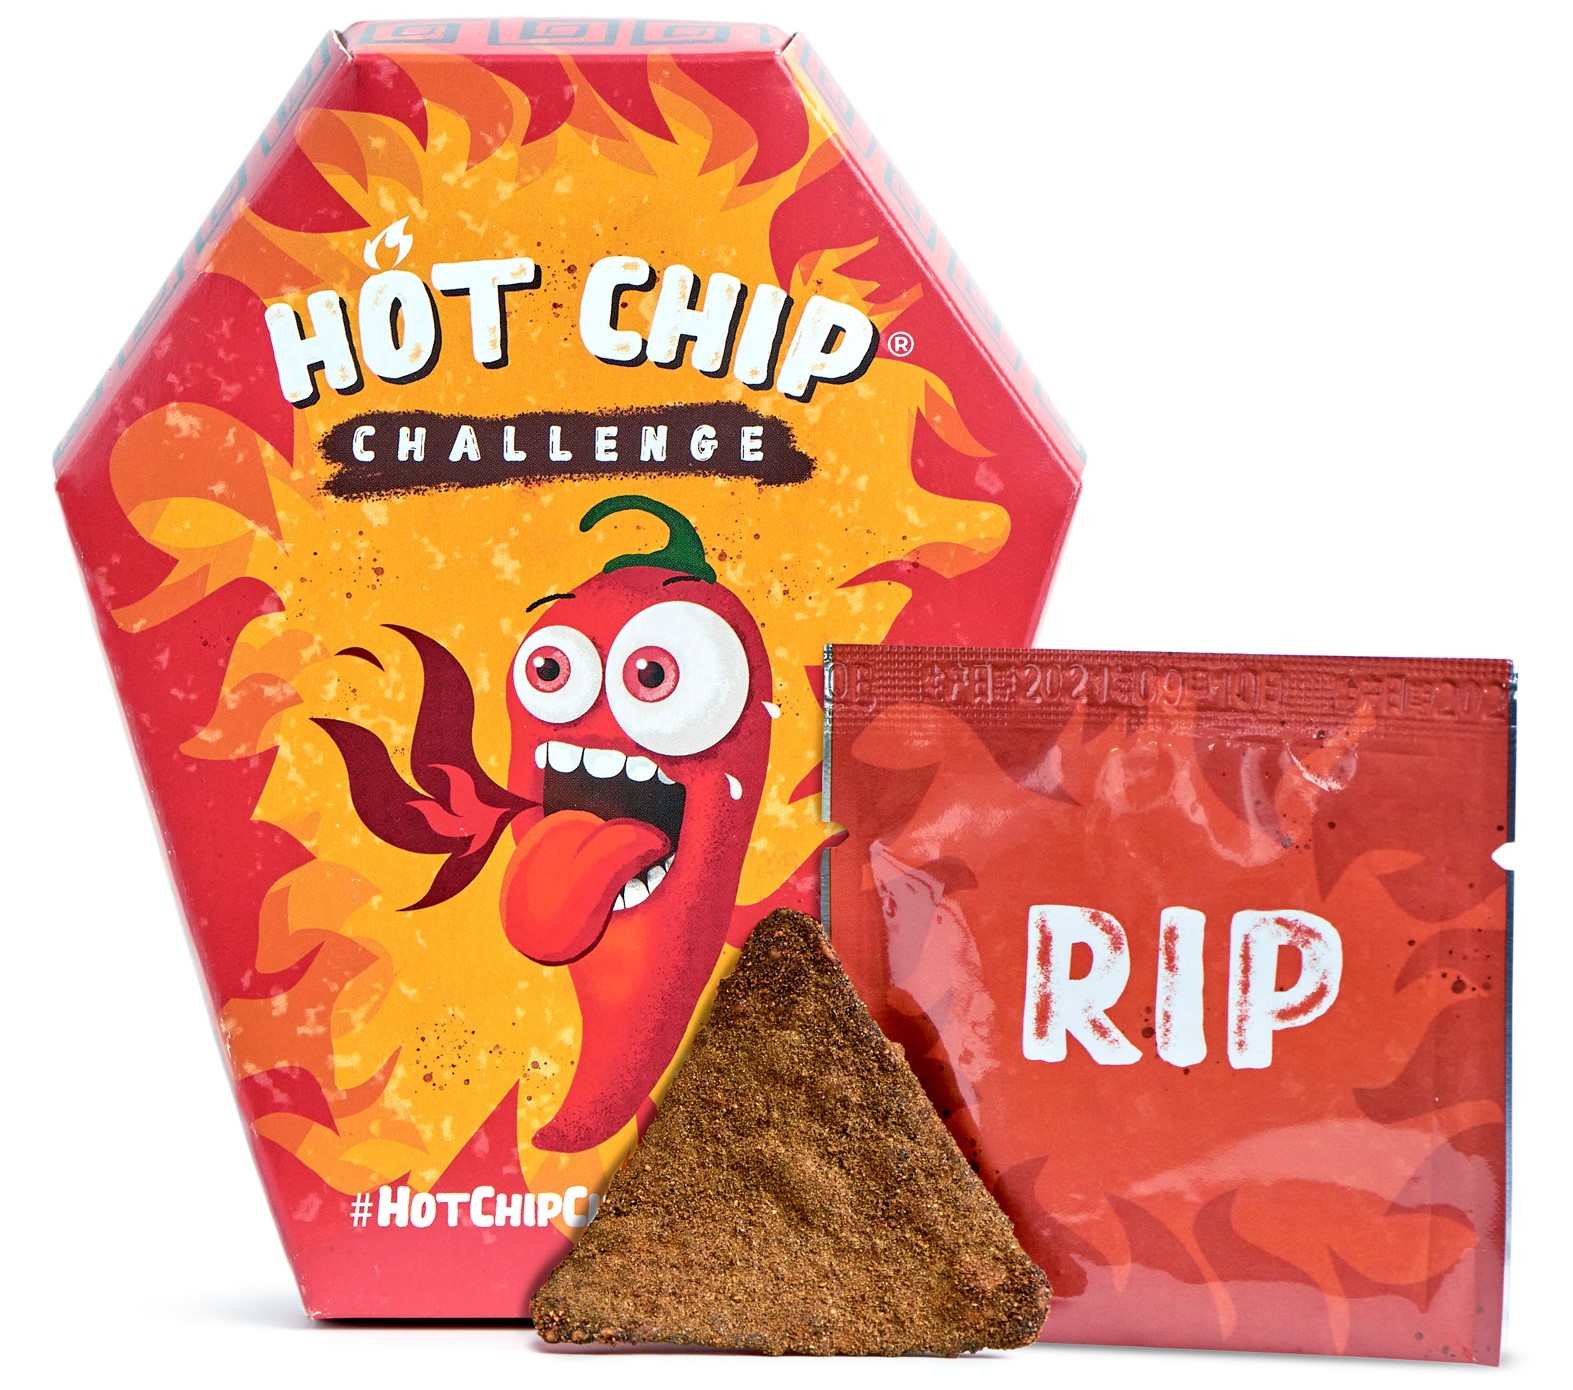 Hot Chip Challenge dare to try it?